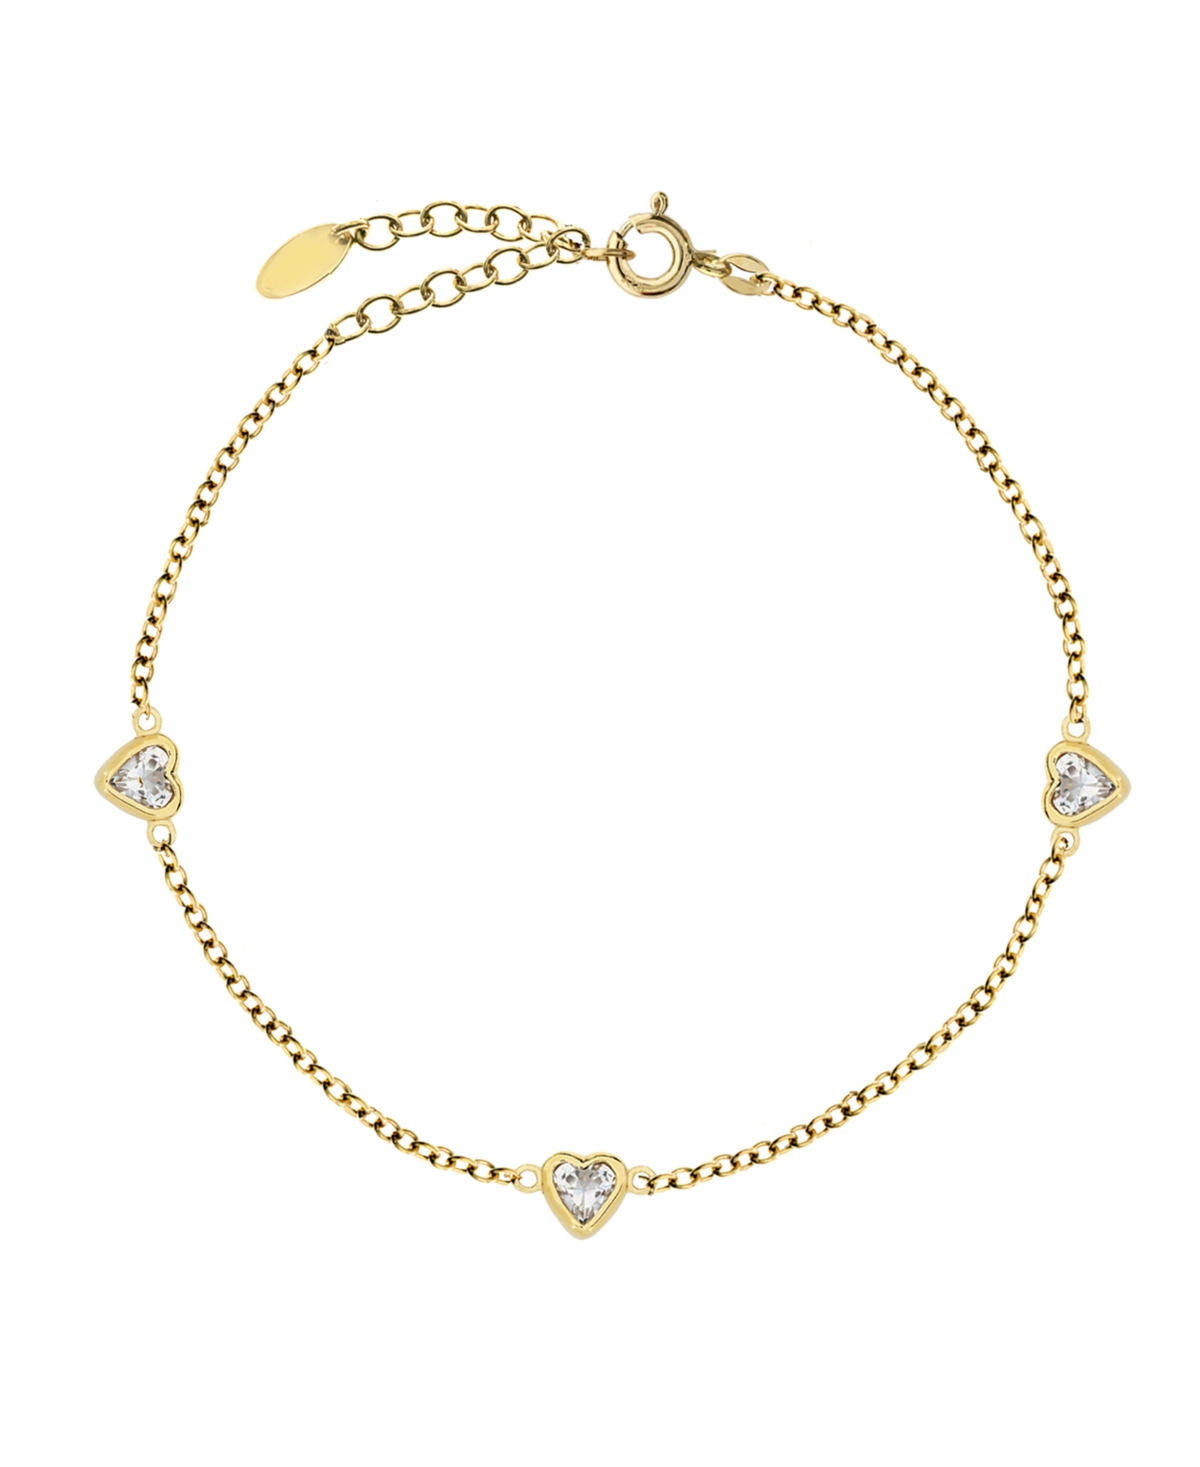 Bodifine Gold Plated Sterling Silver Cz Anklet - Gold